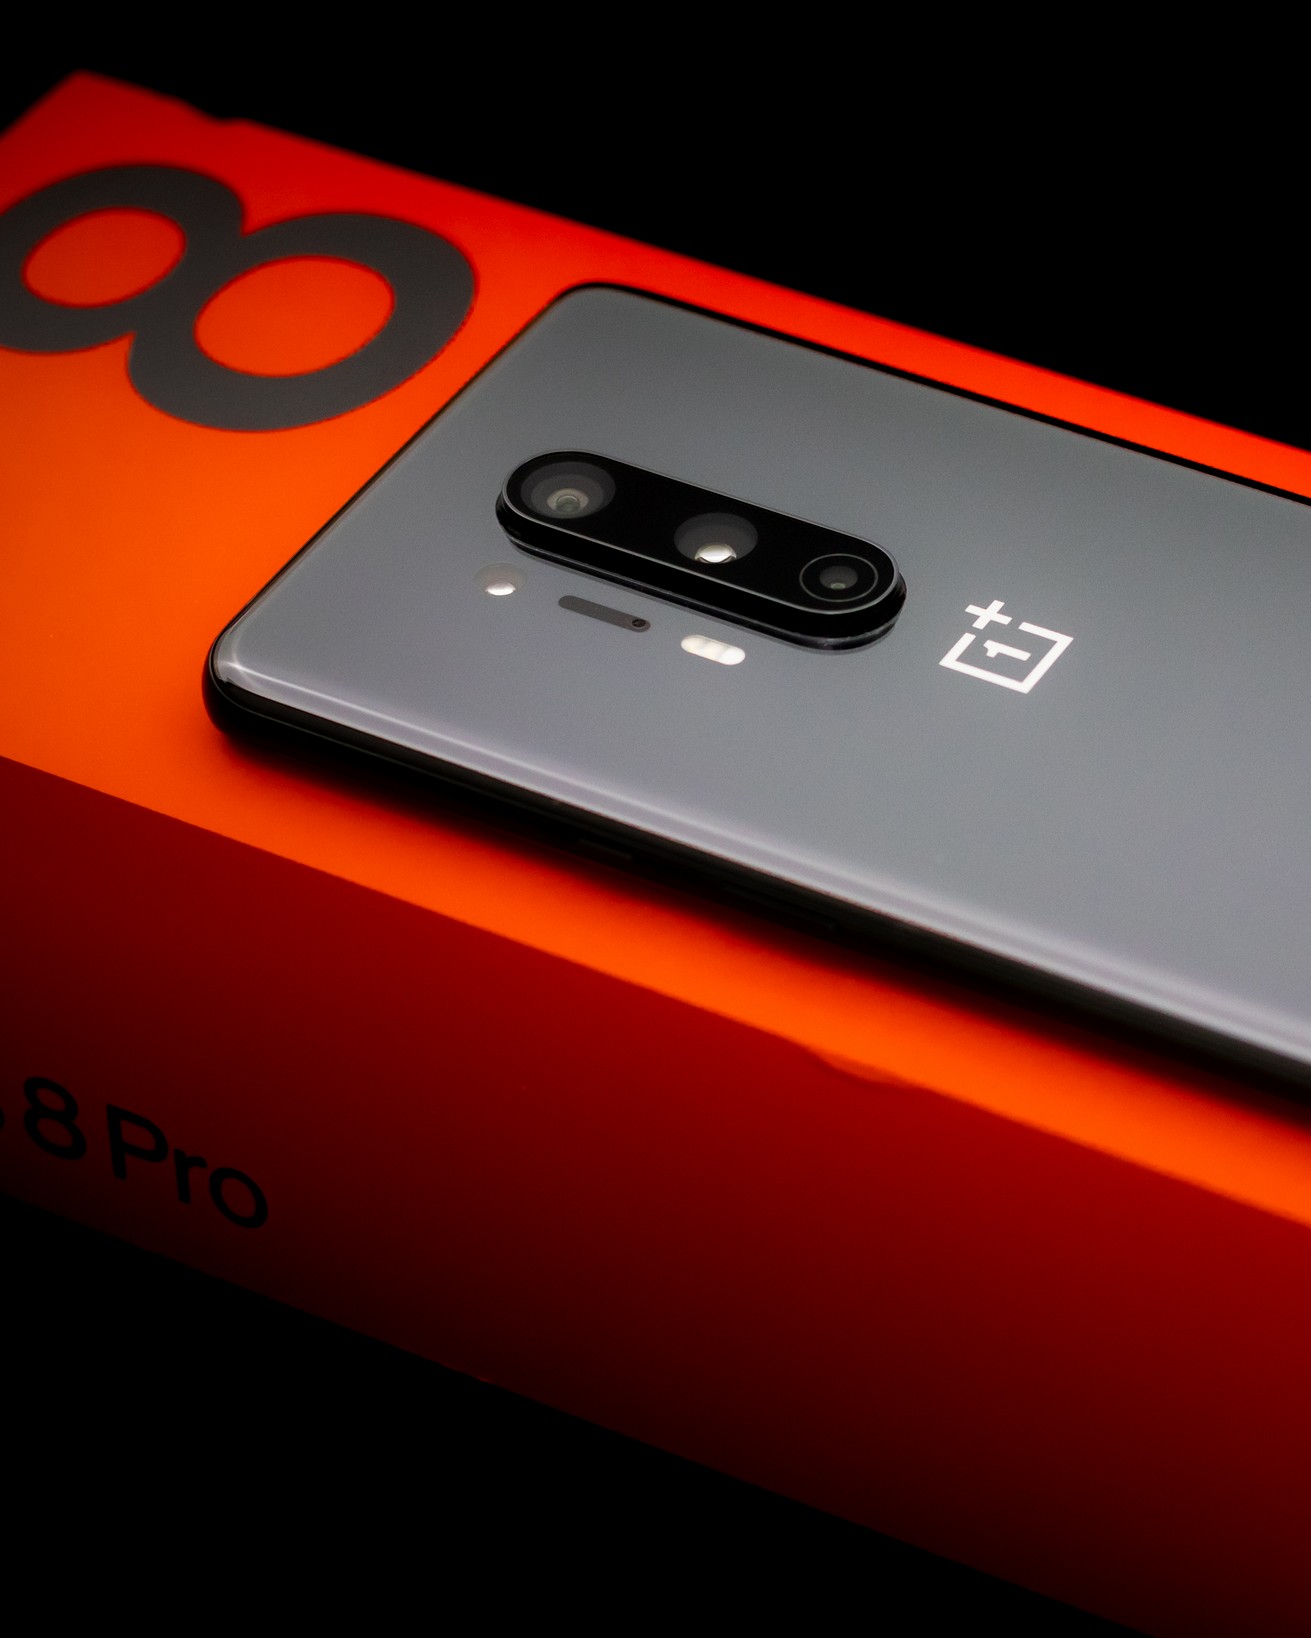 Geekbench shows OnePlus Clover with Snapdragon 460 & 4GB RAM